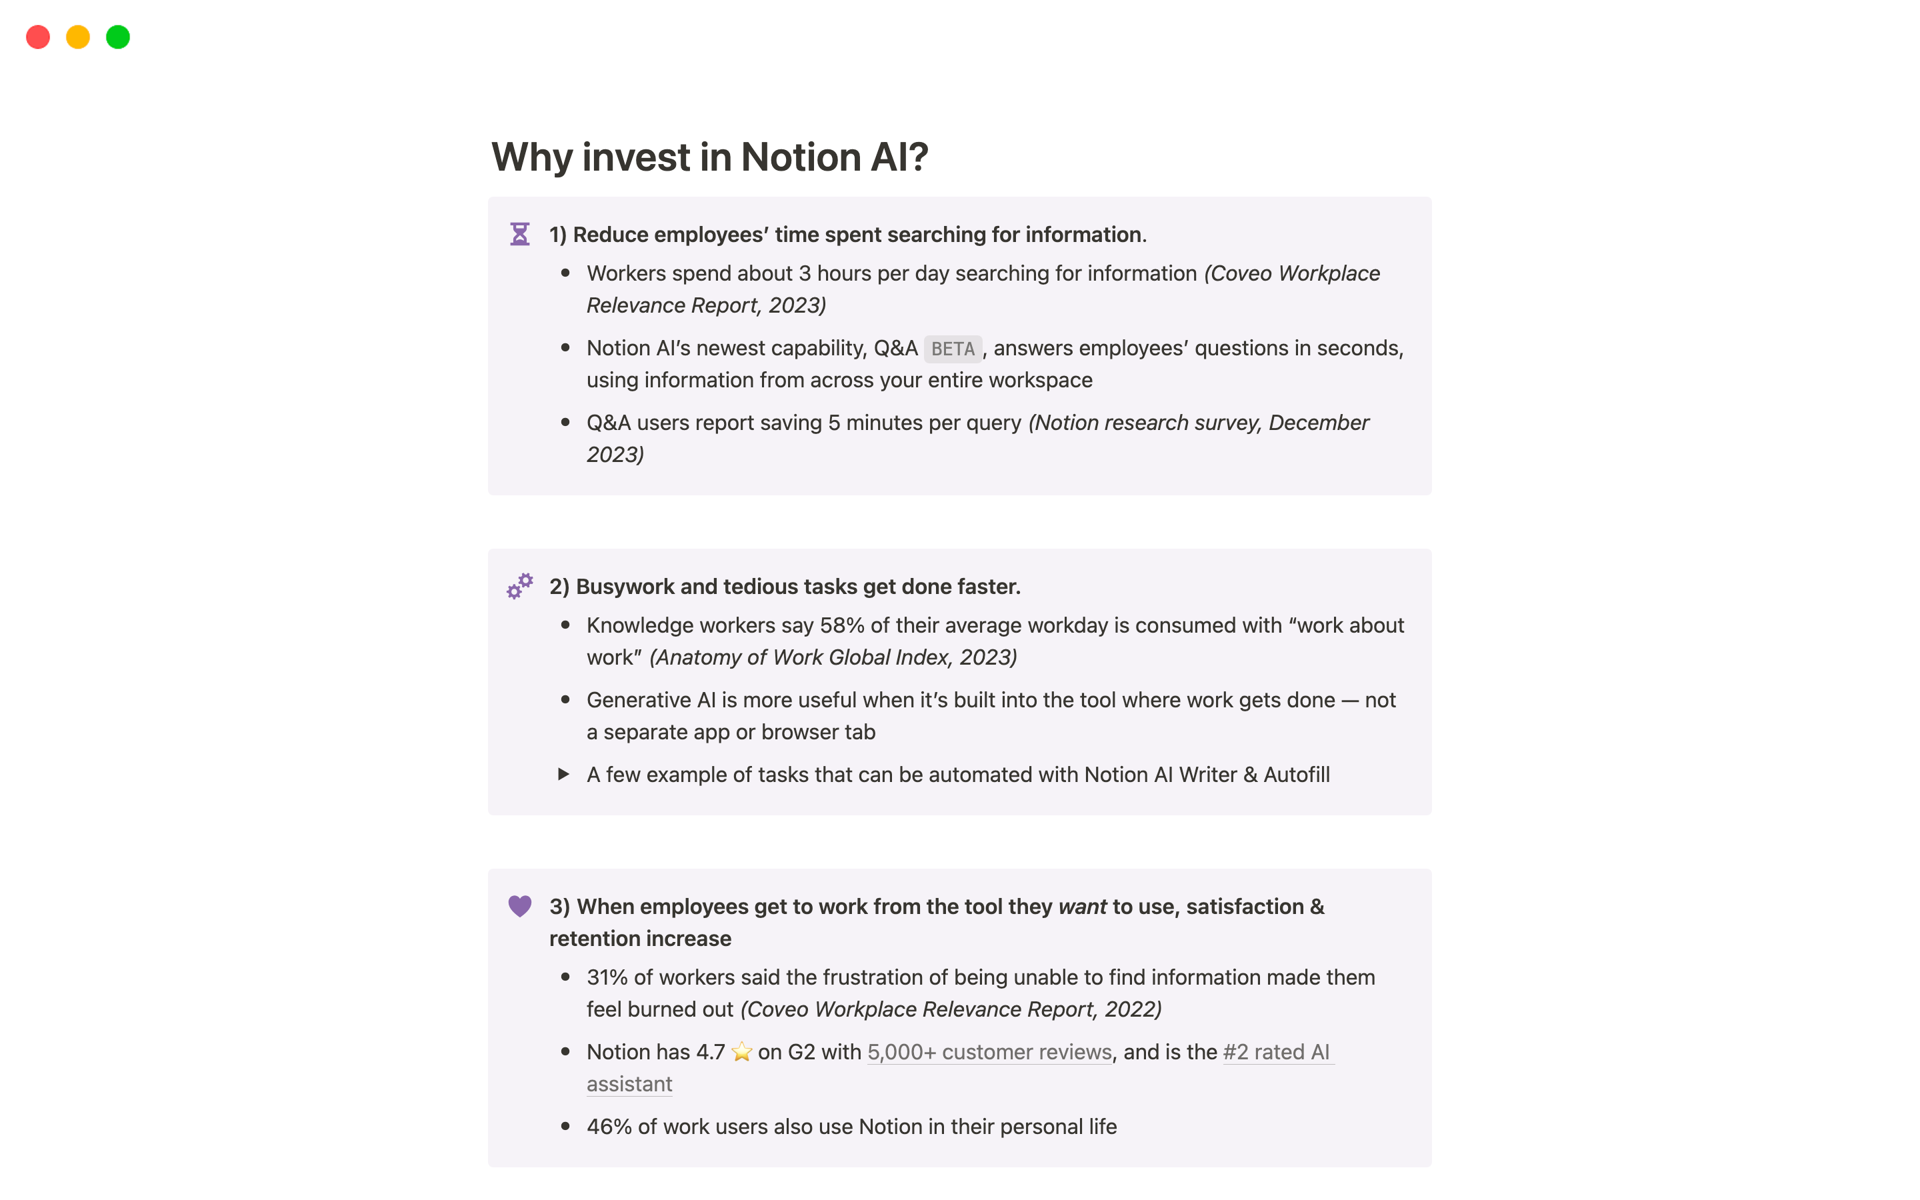 Build a business case for Notion AI with this comprehensive, ROI-focused template.